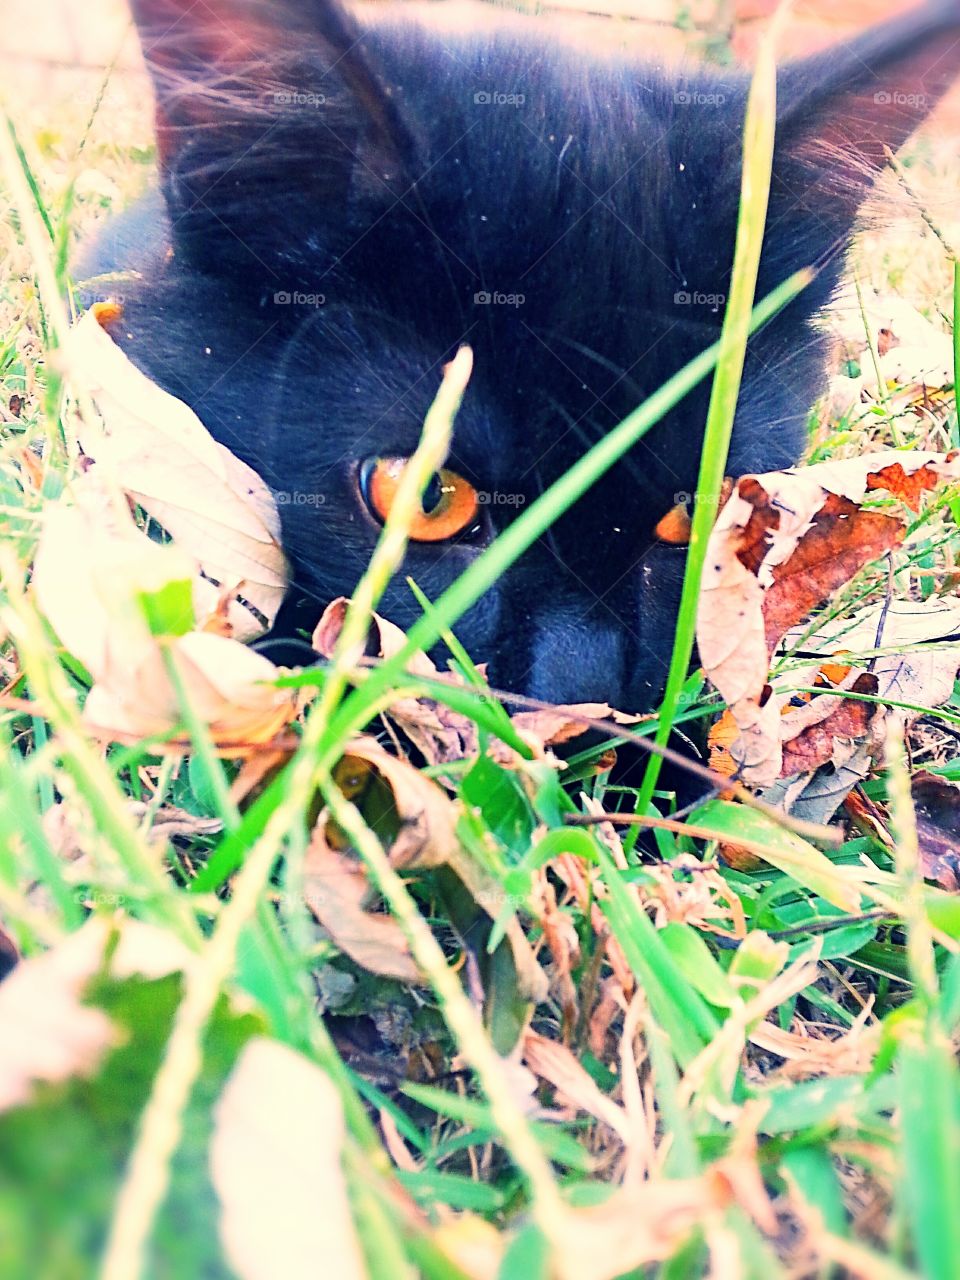 A black cat playing in the leaves.